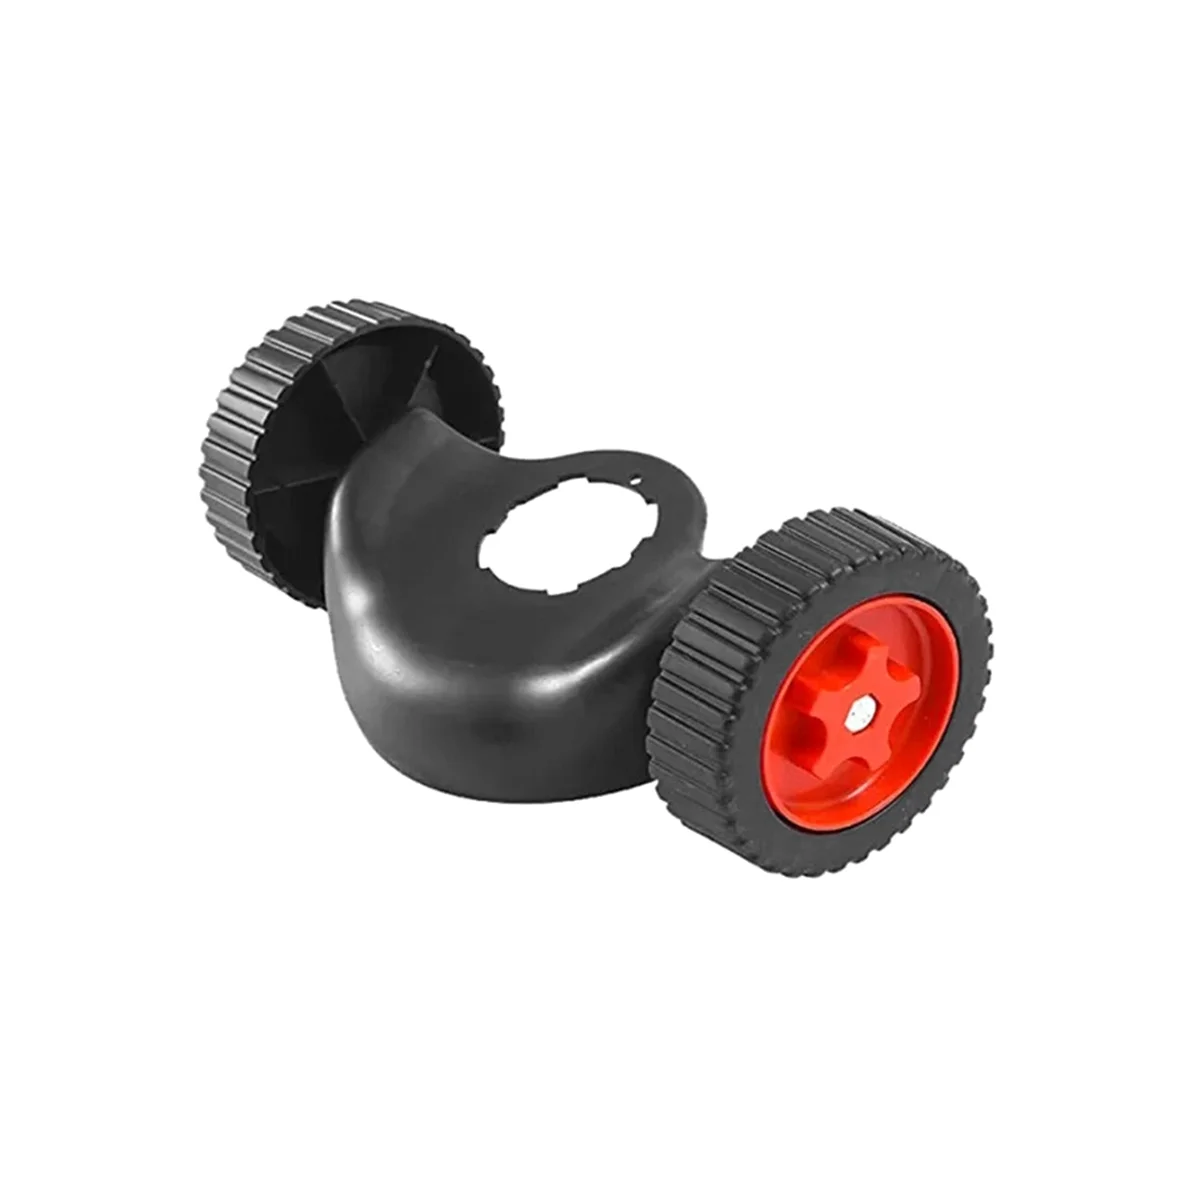 

Auxiliary Wheel of Lawn Mower Accessories Detachable Universal Lawn Mower Wheel Can Improve Work Efficiency